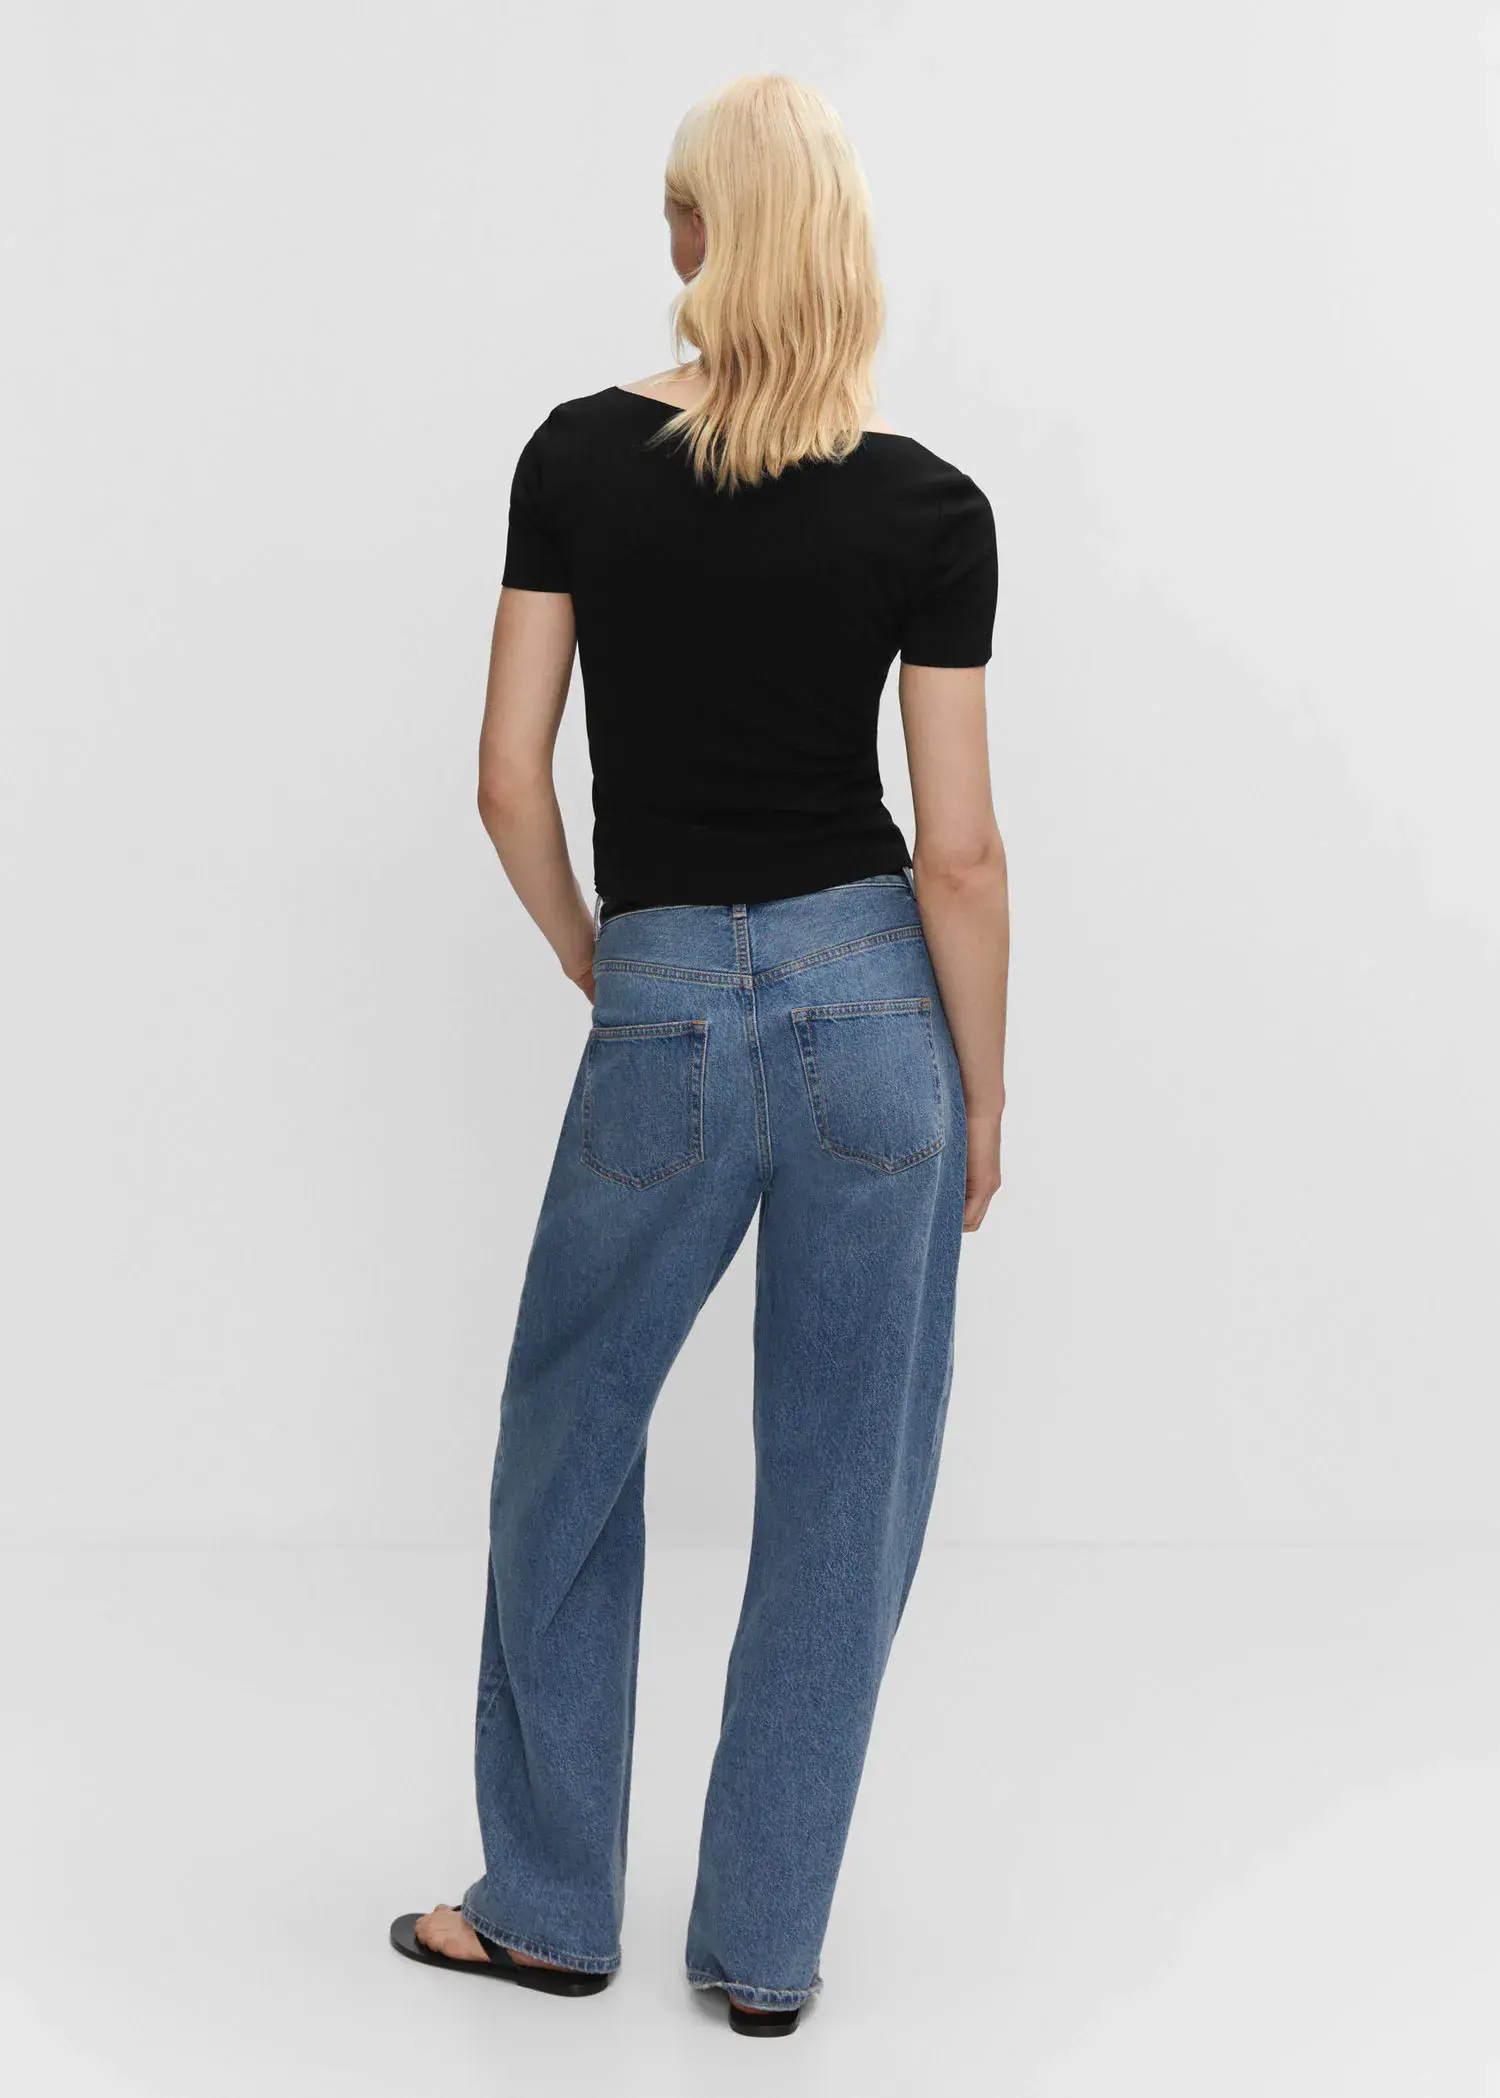 Mango Square neck t-shirt. a woman wearing a black shirt and blue jeans. 